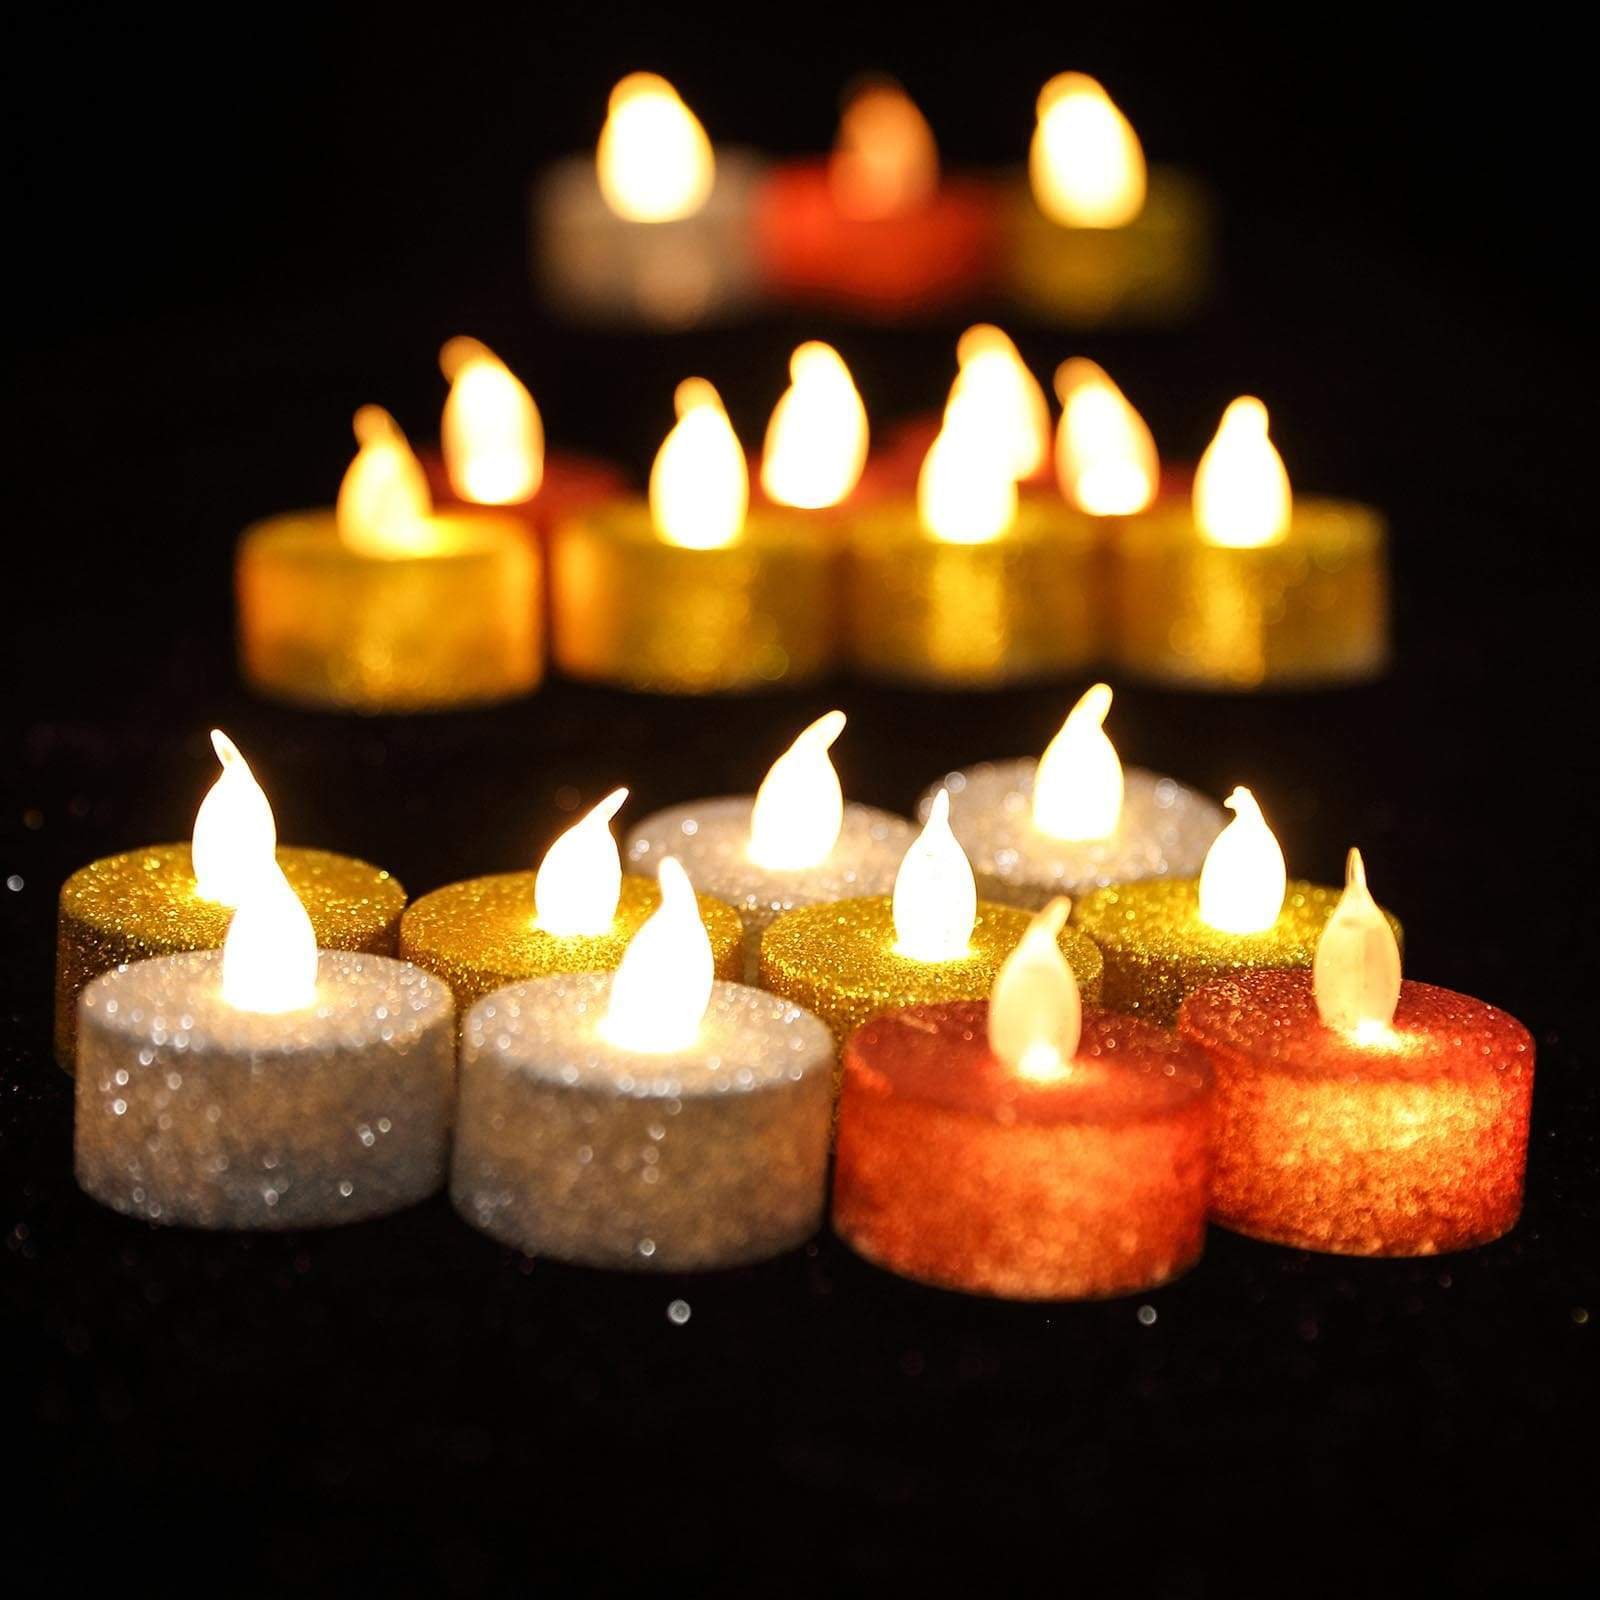 12 Glittered LED Battery Operated Tealight Candles Lights